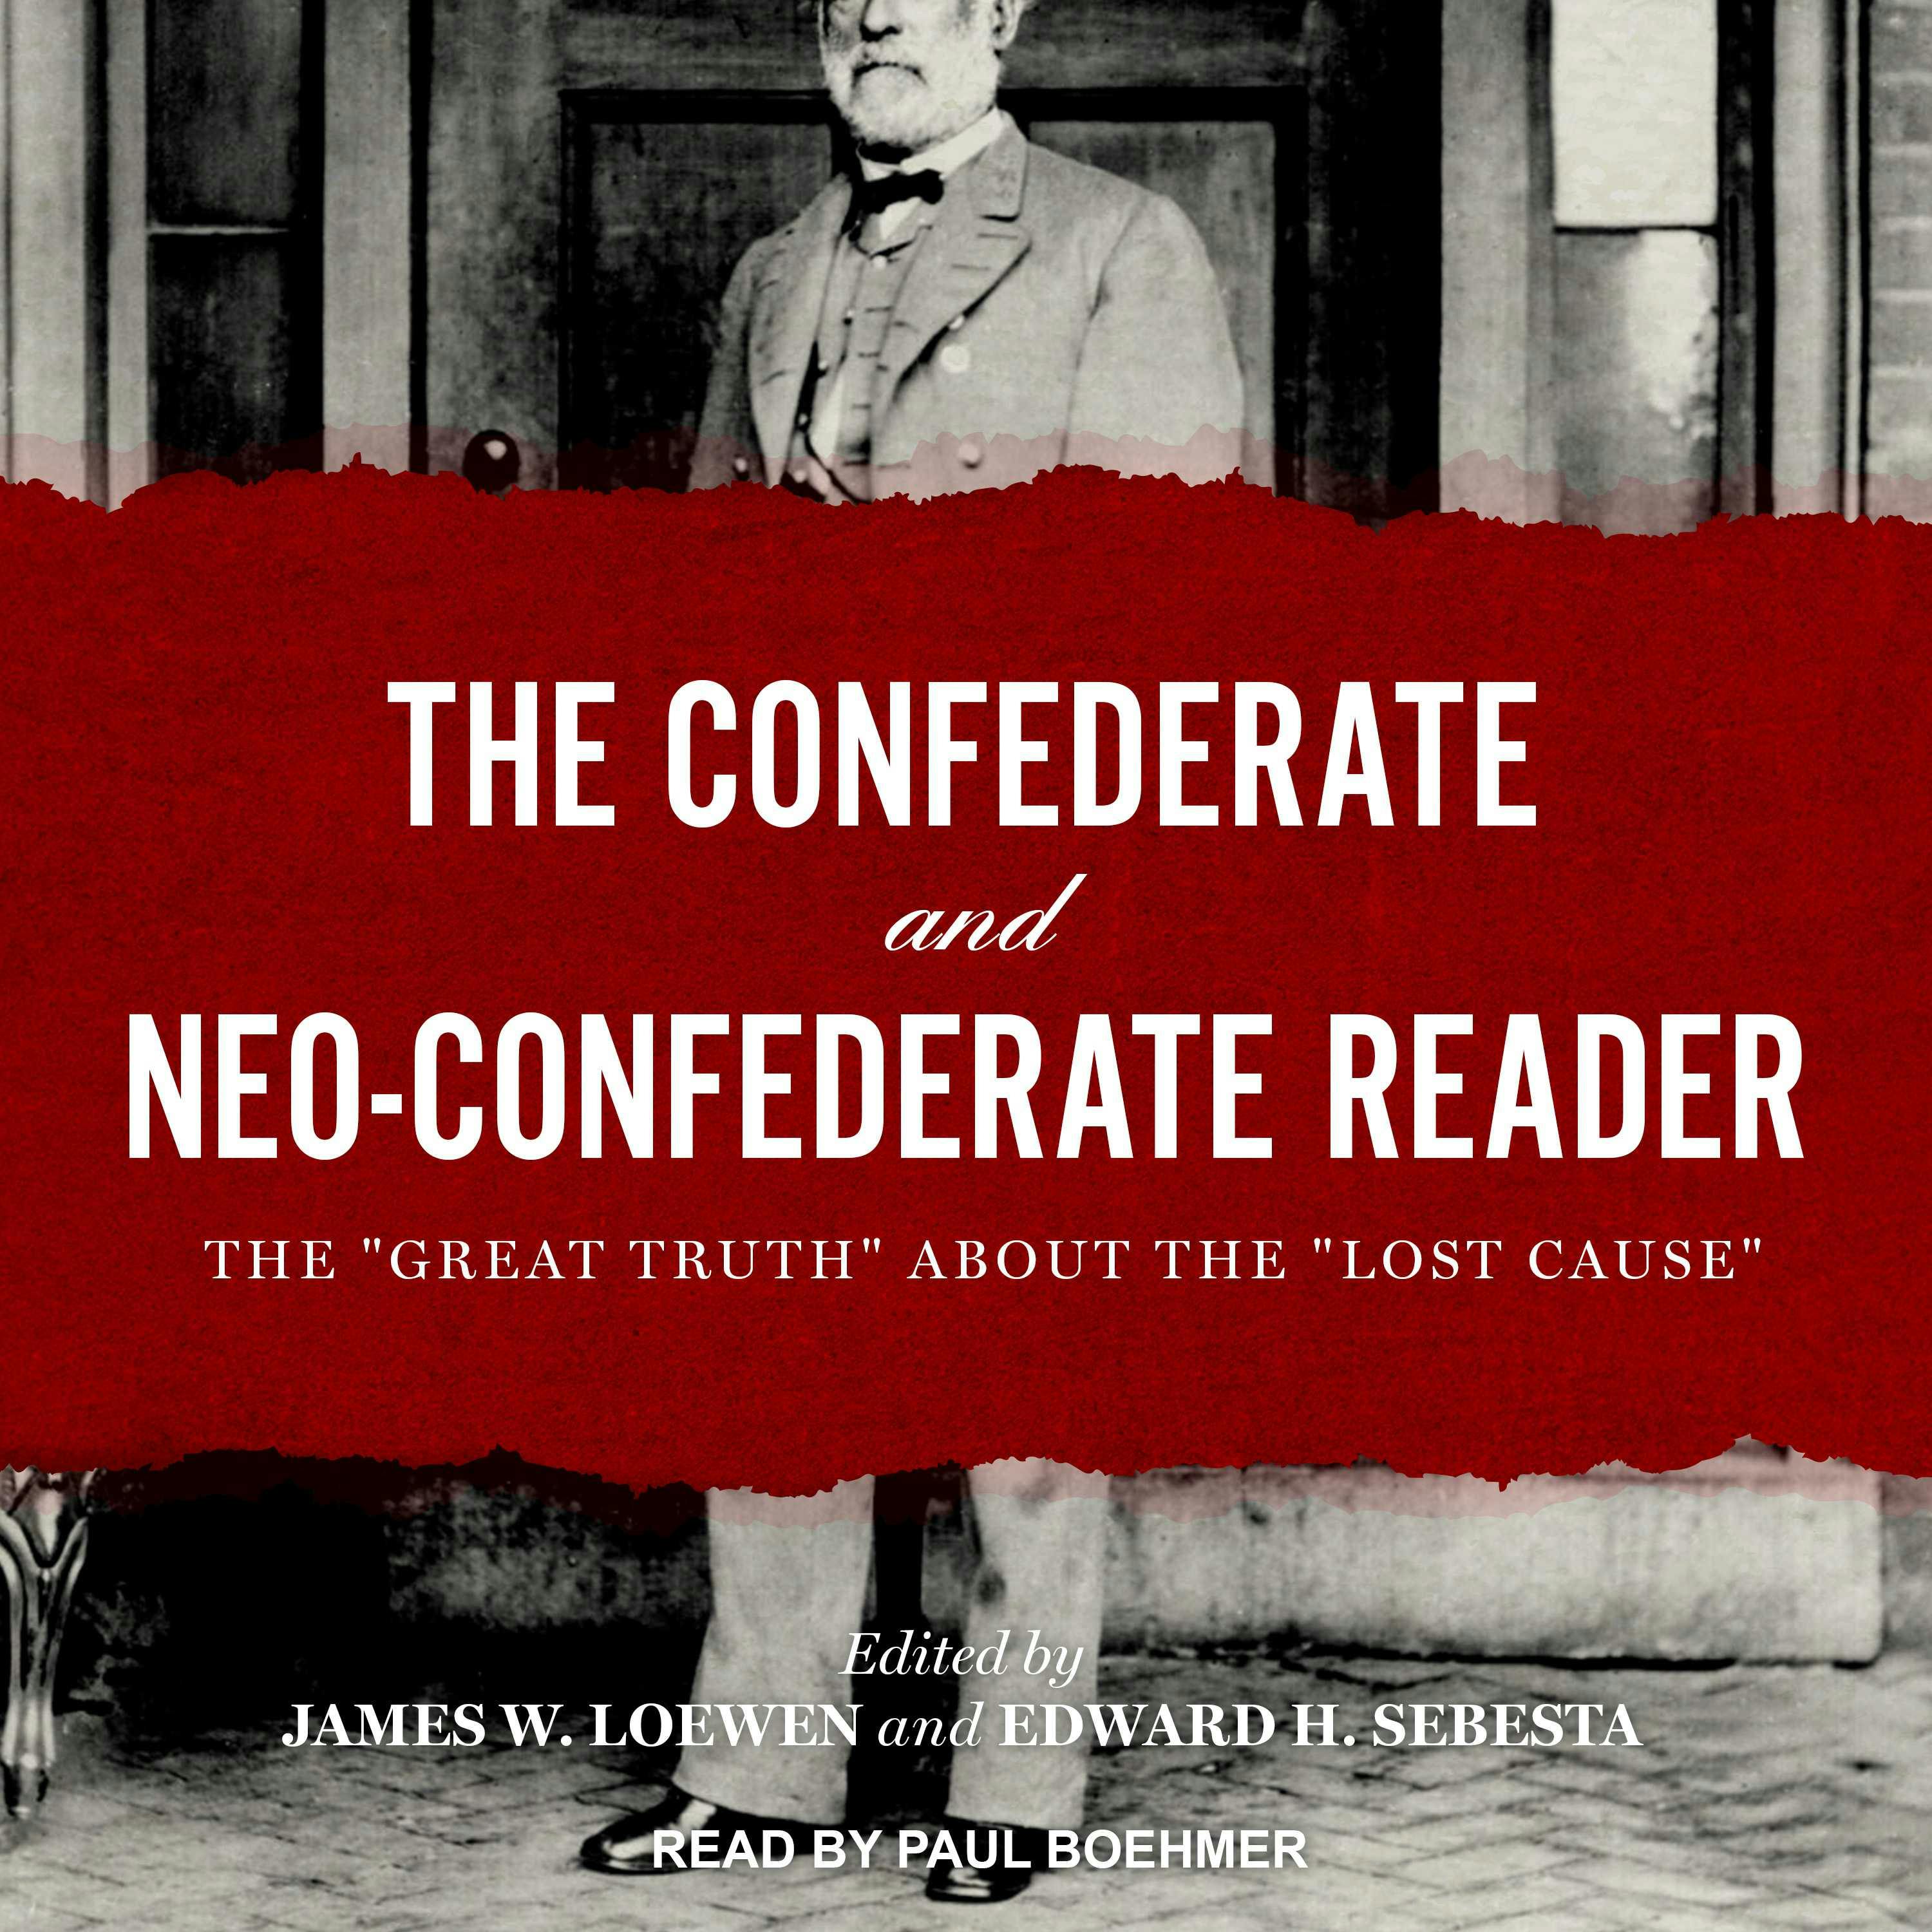 The Confederate and Neo-Confederate Reader: The "Great Truth" about the "Lost Cause" - James W. Loewen, Edward H. Sebesta